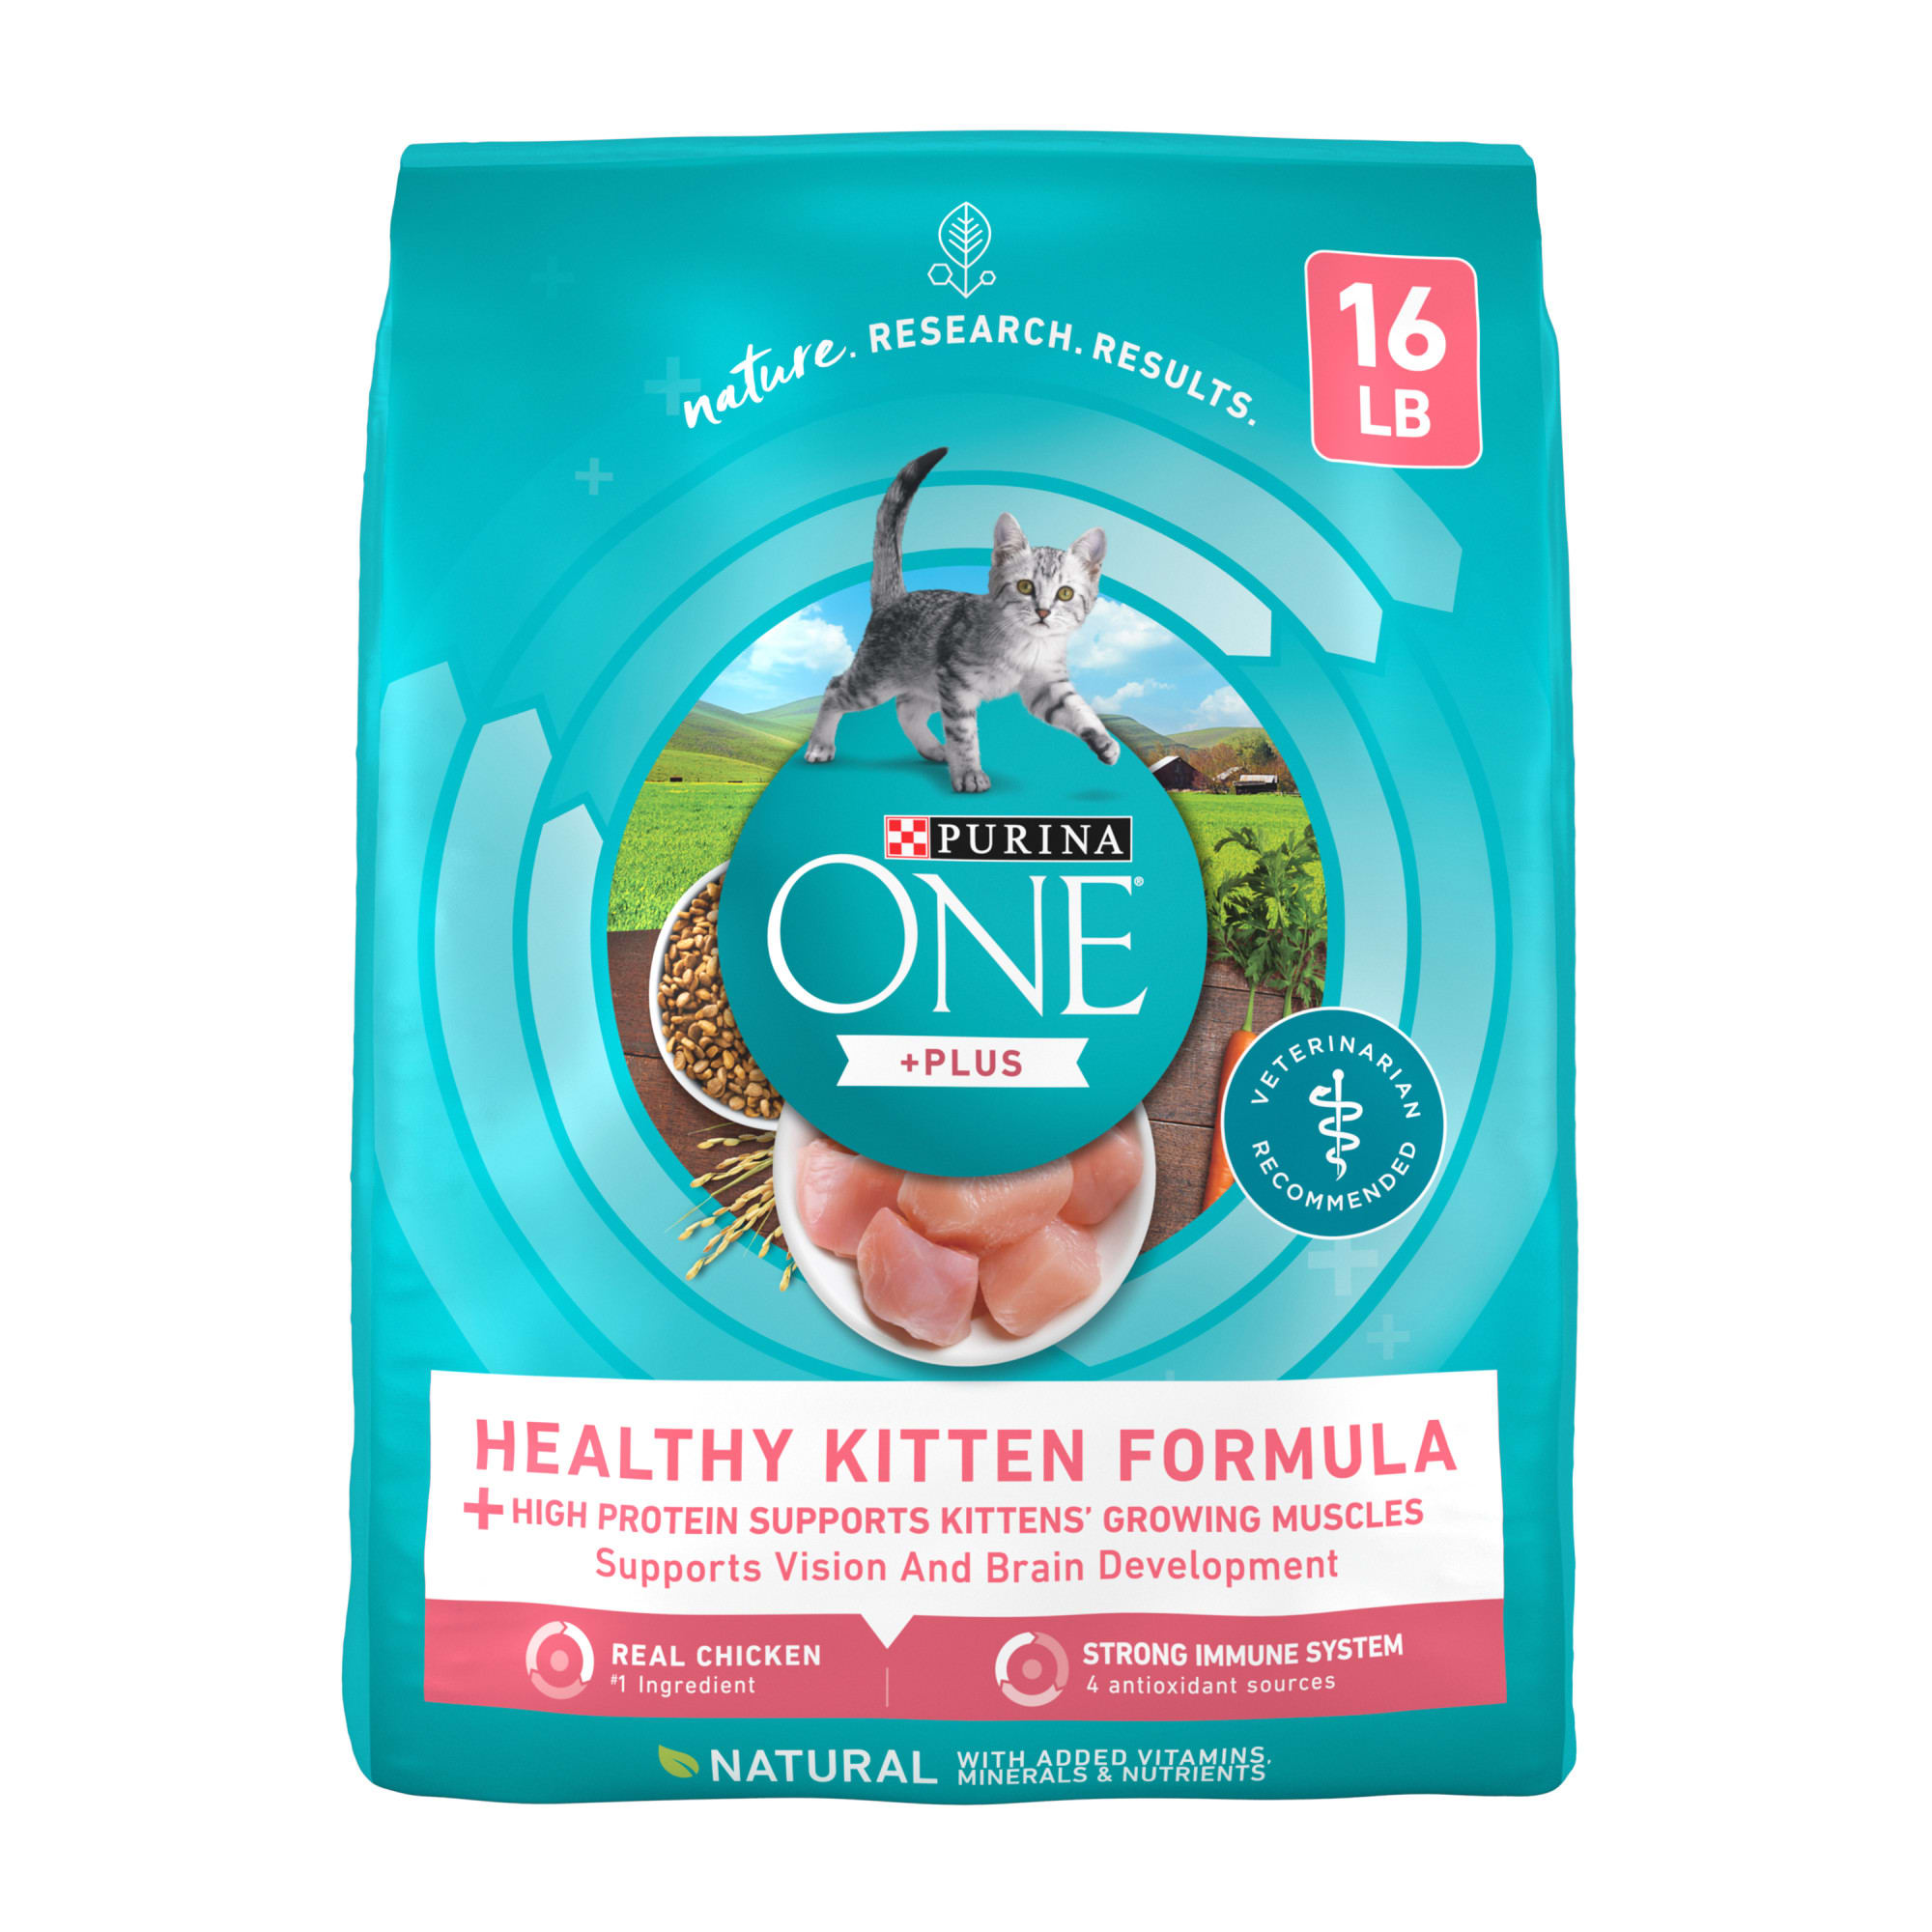 UPC 017800104777 product image for Purina ONE Healthy Kitten +Plus Formula High Protein Natural Dry Food, 16 lbs. | upcitemdb.com